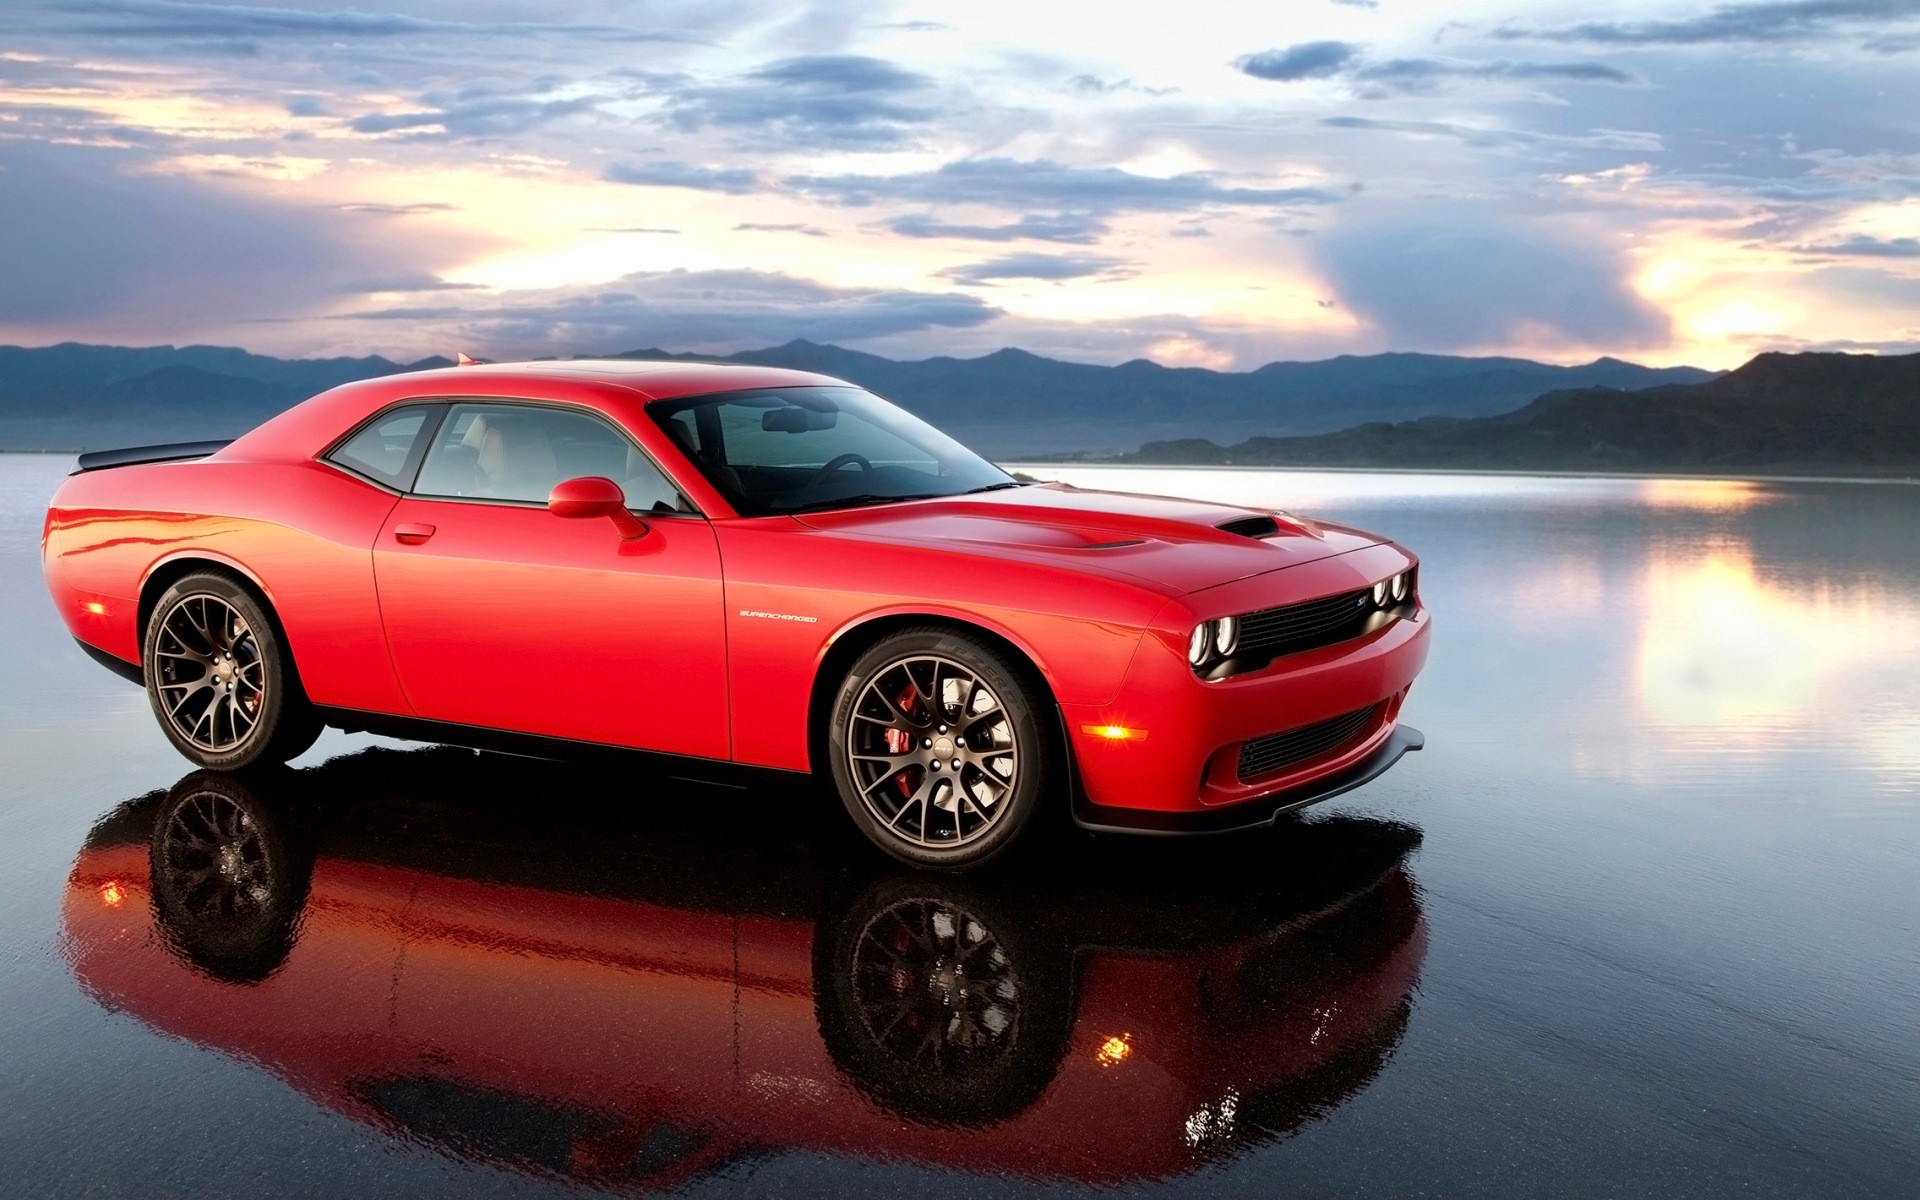 General 1920x1200 Dodge Challenger Dodge reflection muscle cars vehicle red cars outdoors car American cars Stellantis